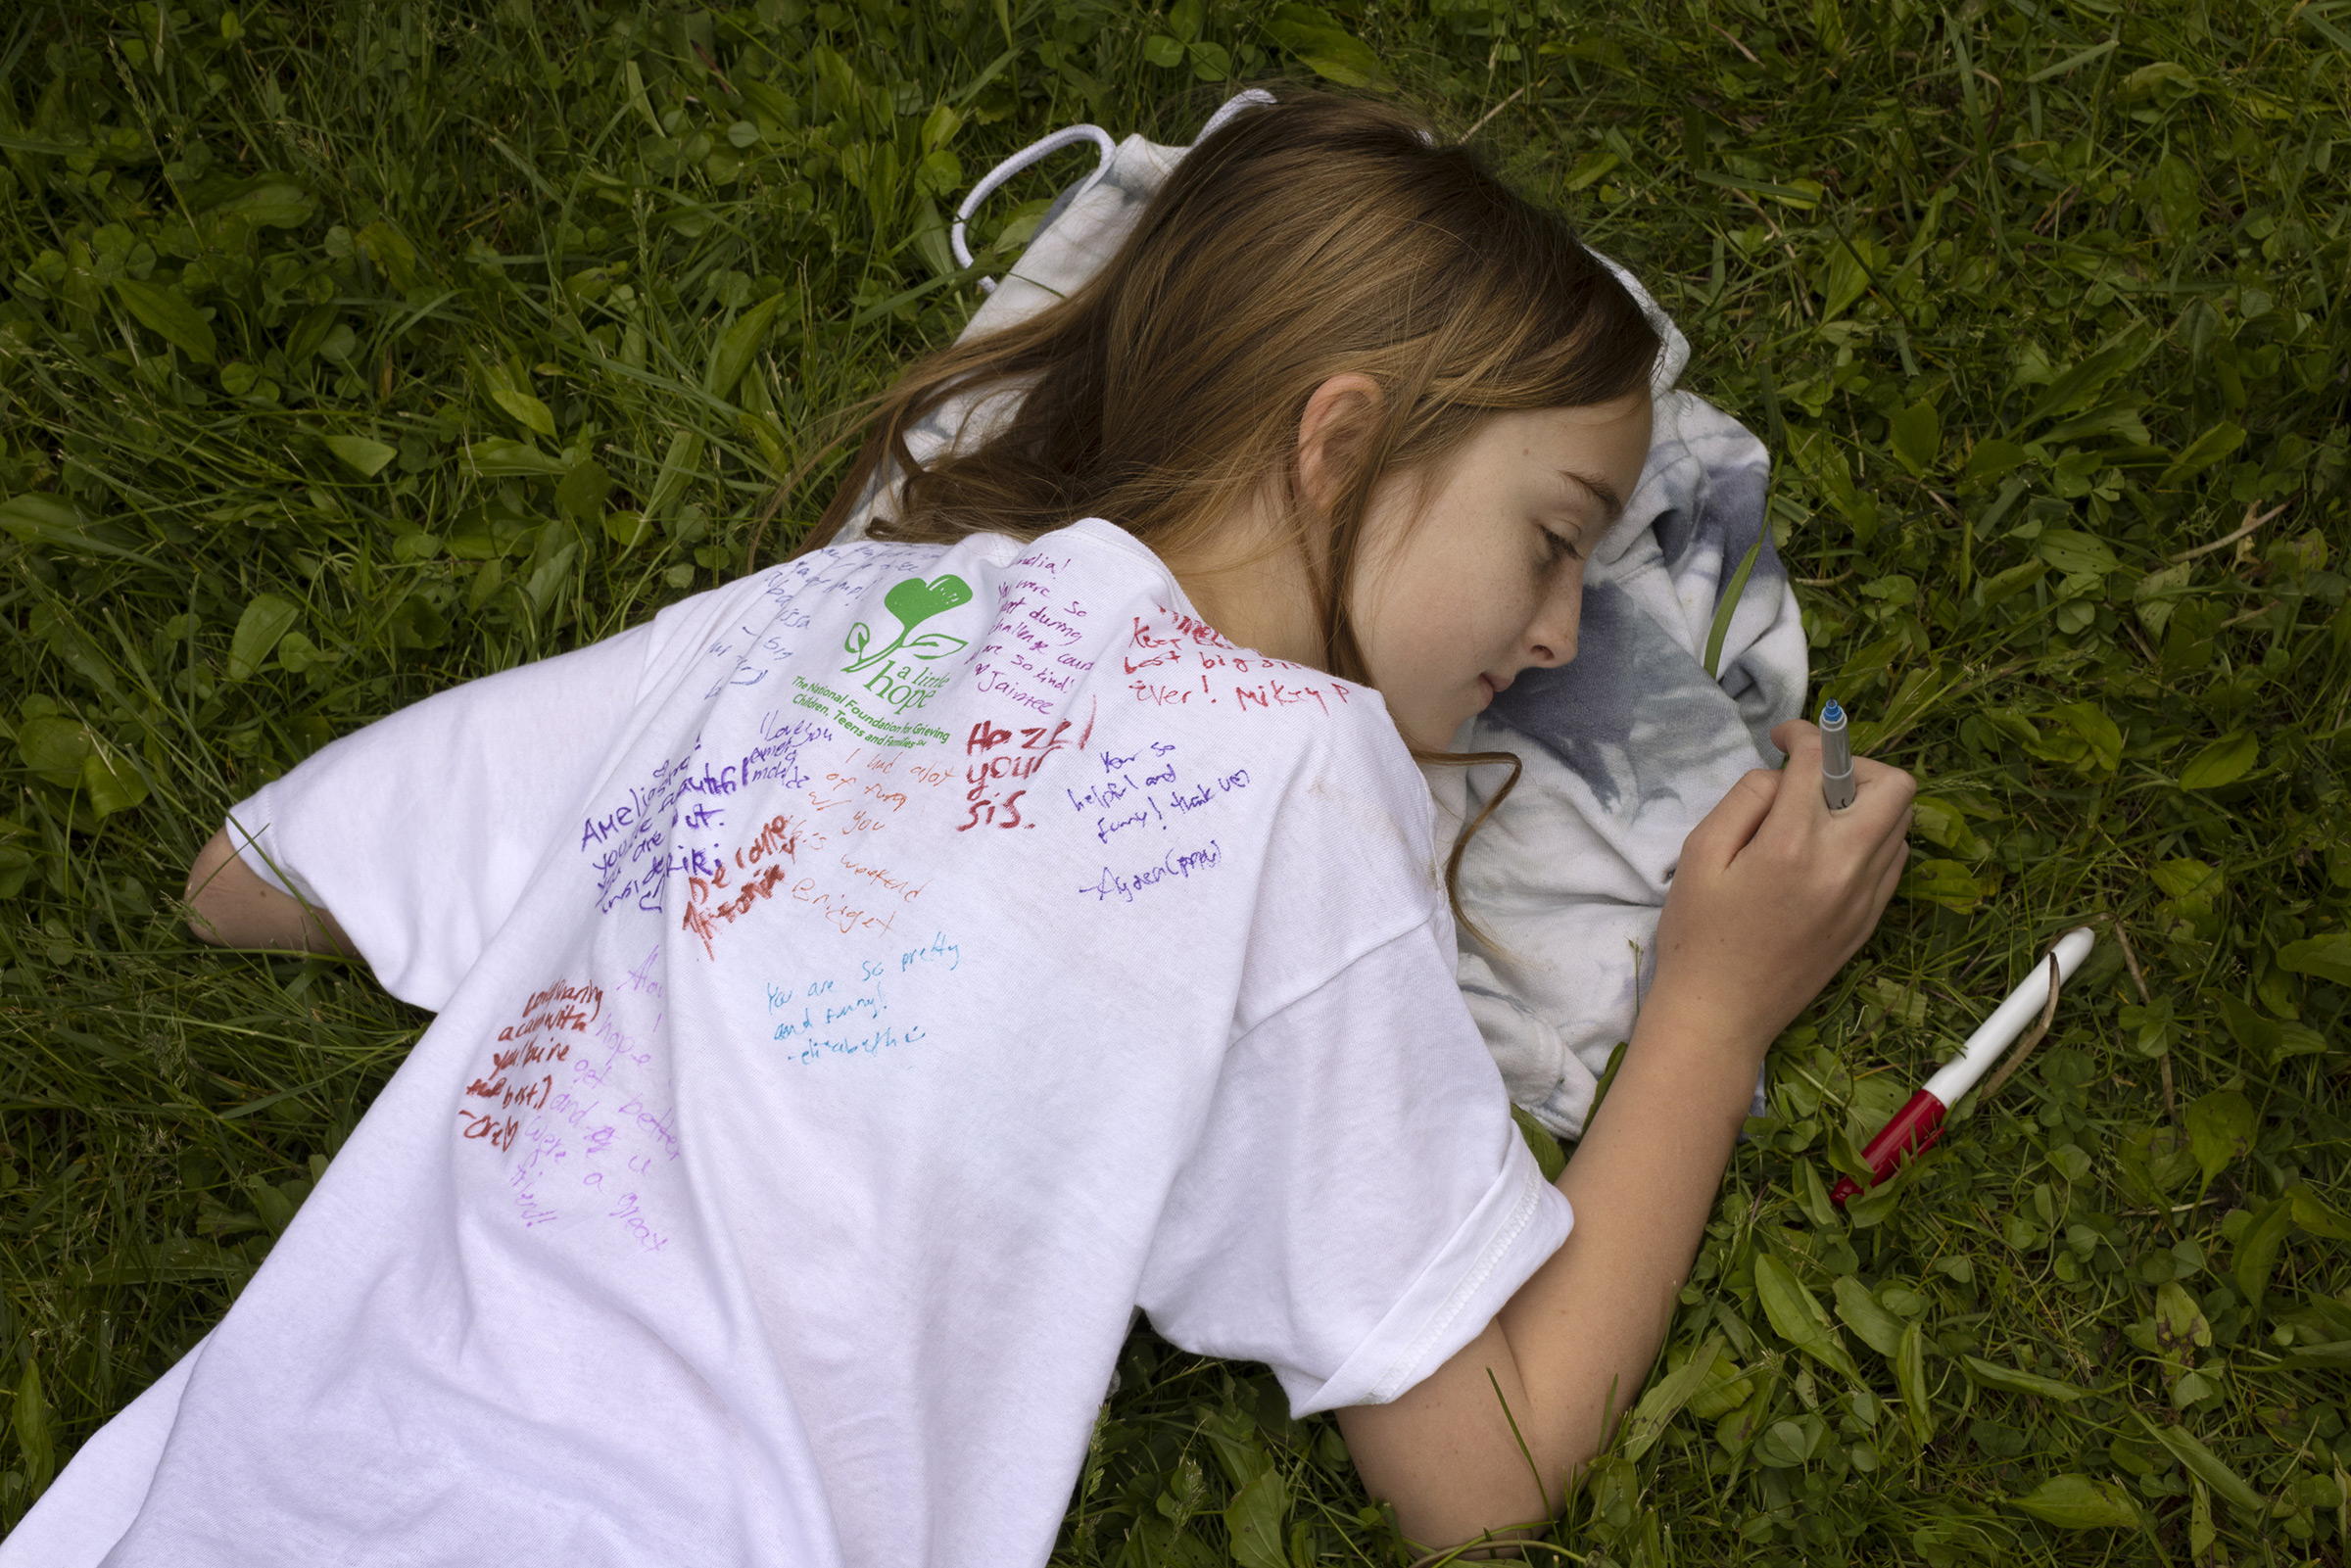 On the last day of Comfort Zone Camp, kids sign one another's shirts. Pictured here is camper Amelia Smith. (Ilona Szwarc for TIME)